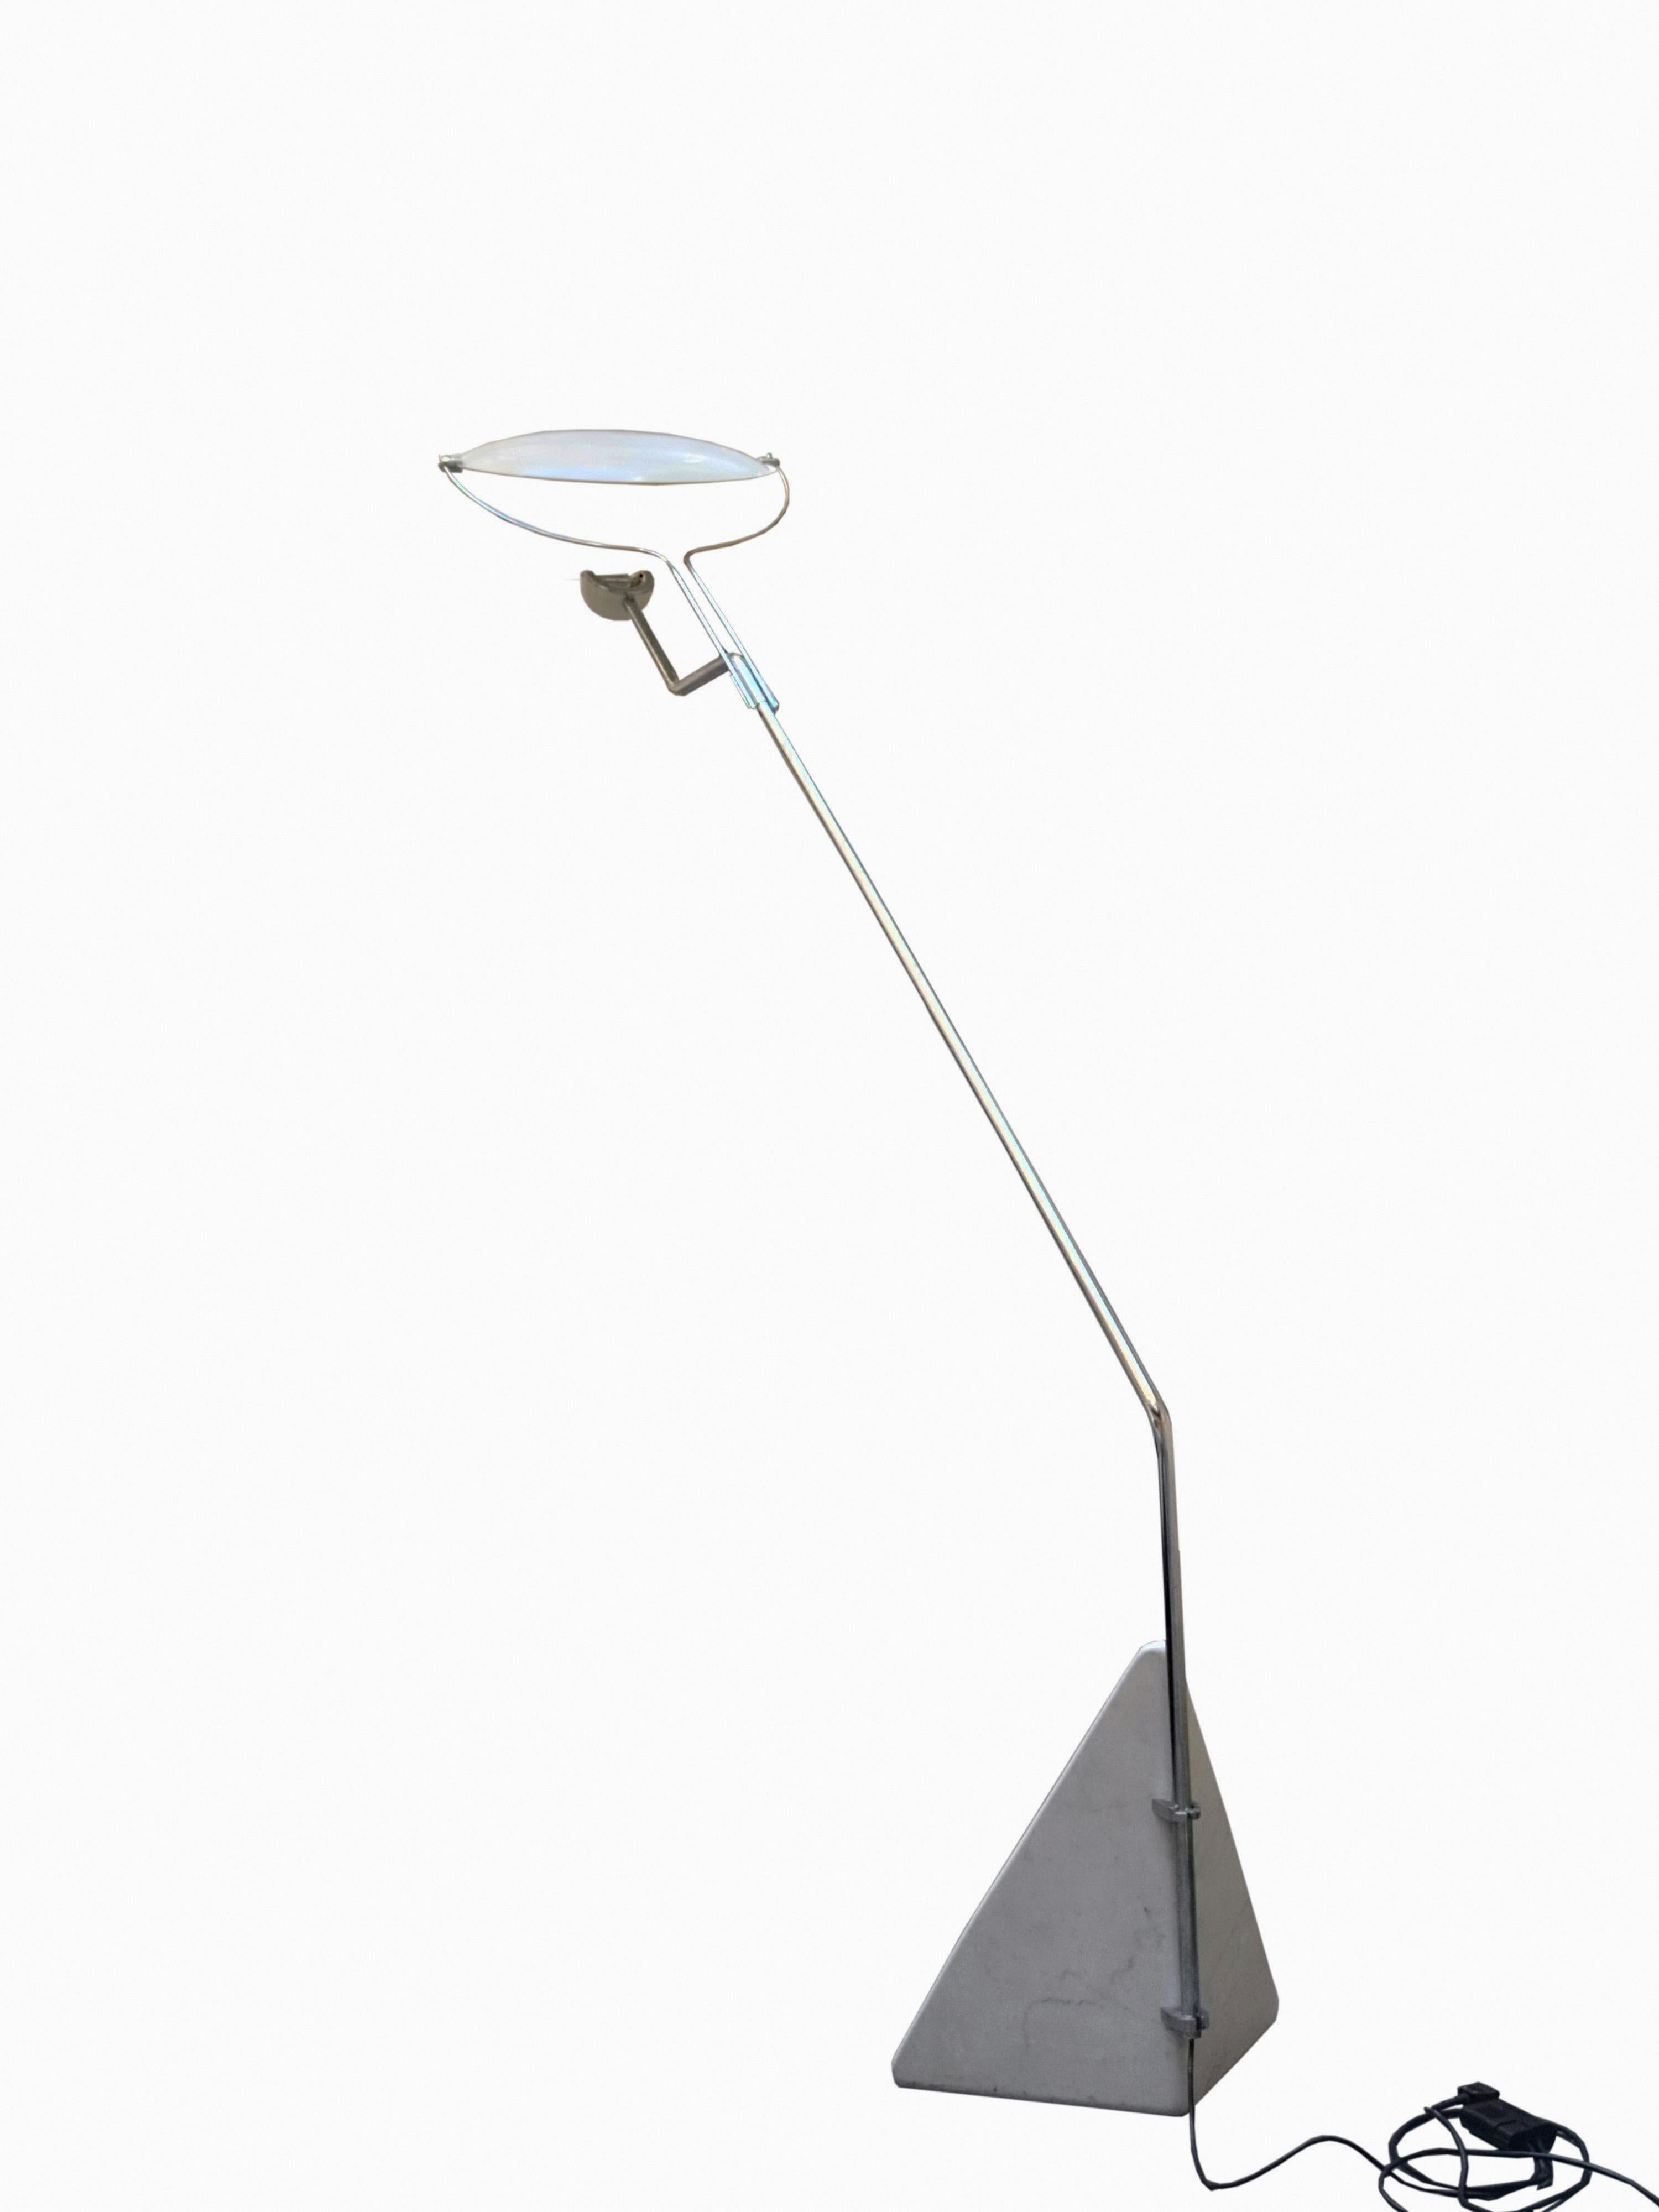 Claudio Salocchi for Skipper, 'Riflessione' floor lamp, marble, chromed steel, enameled aluminum, Italy, ca. 1973.
This extraordinary floor lamp has a chrome-plated steel frame, enameled aluminum shade, and triangular marble base. The direction of